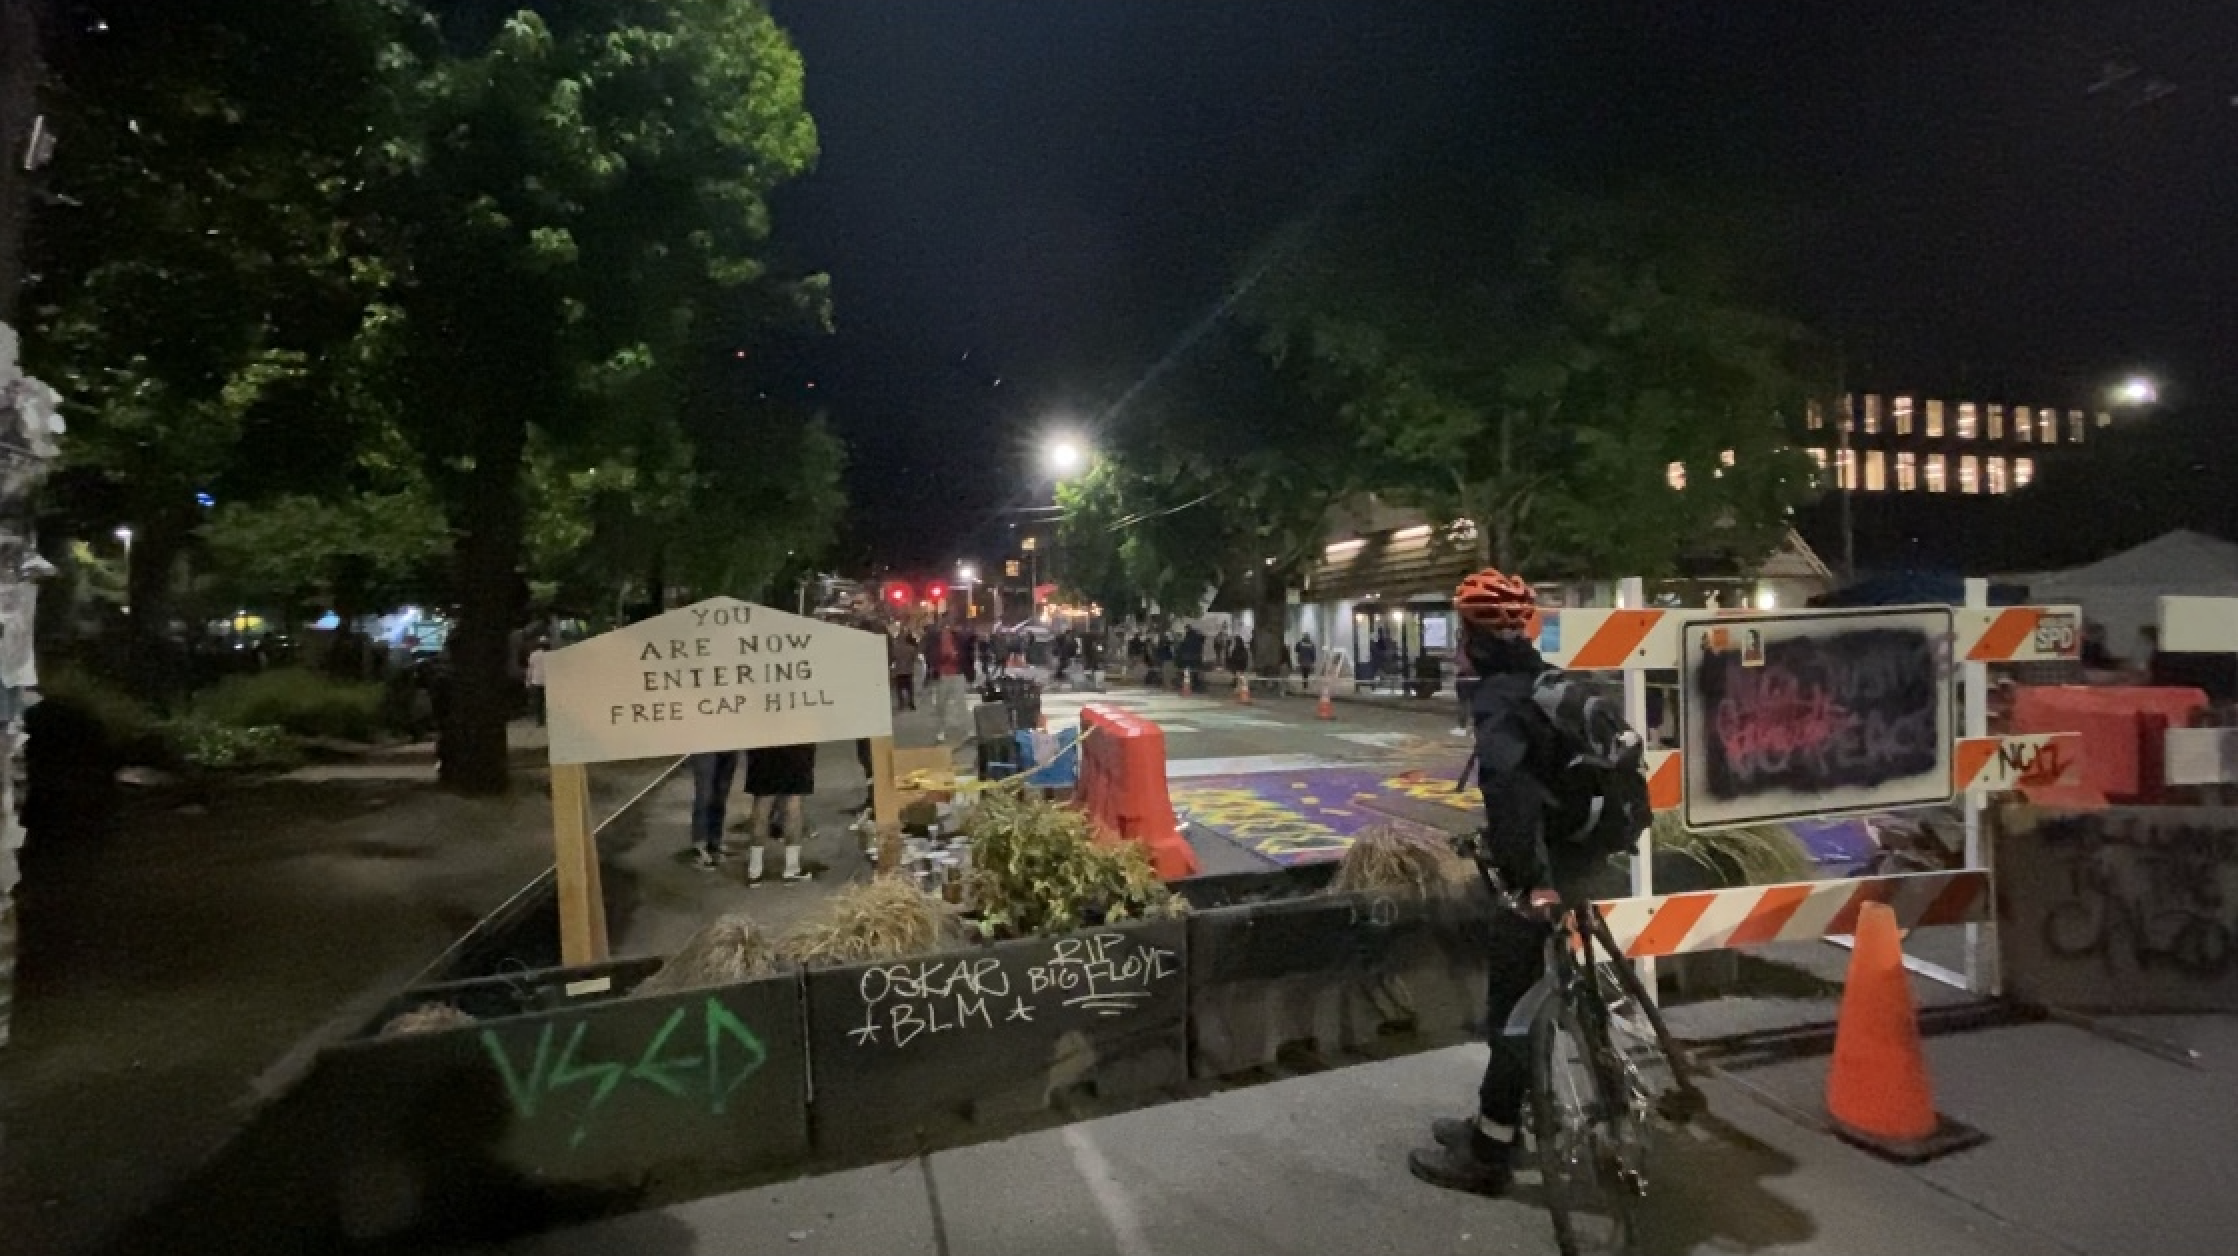 Many of the entry points have both barriers and parked cars, as well as guards protecting CHAZ. (Credit Shelby Talcott)